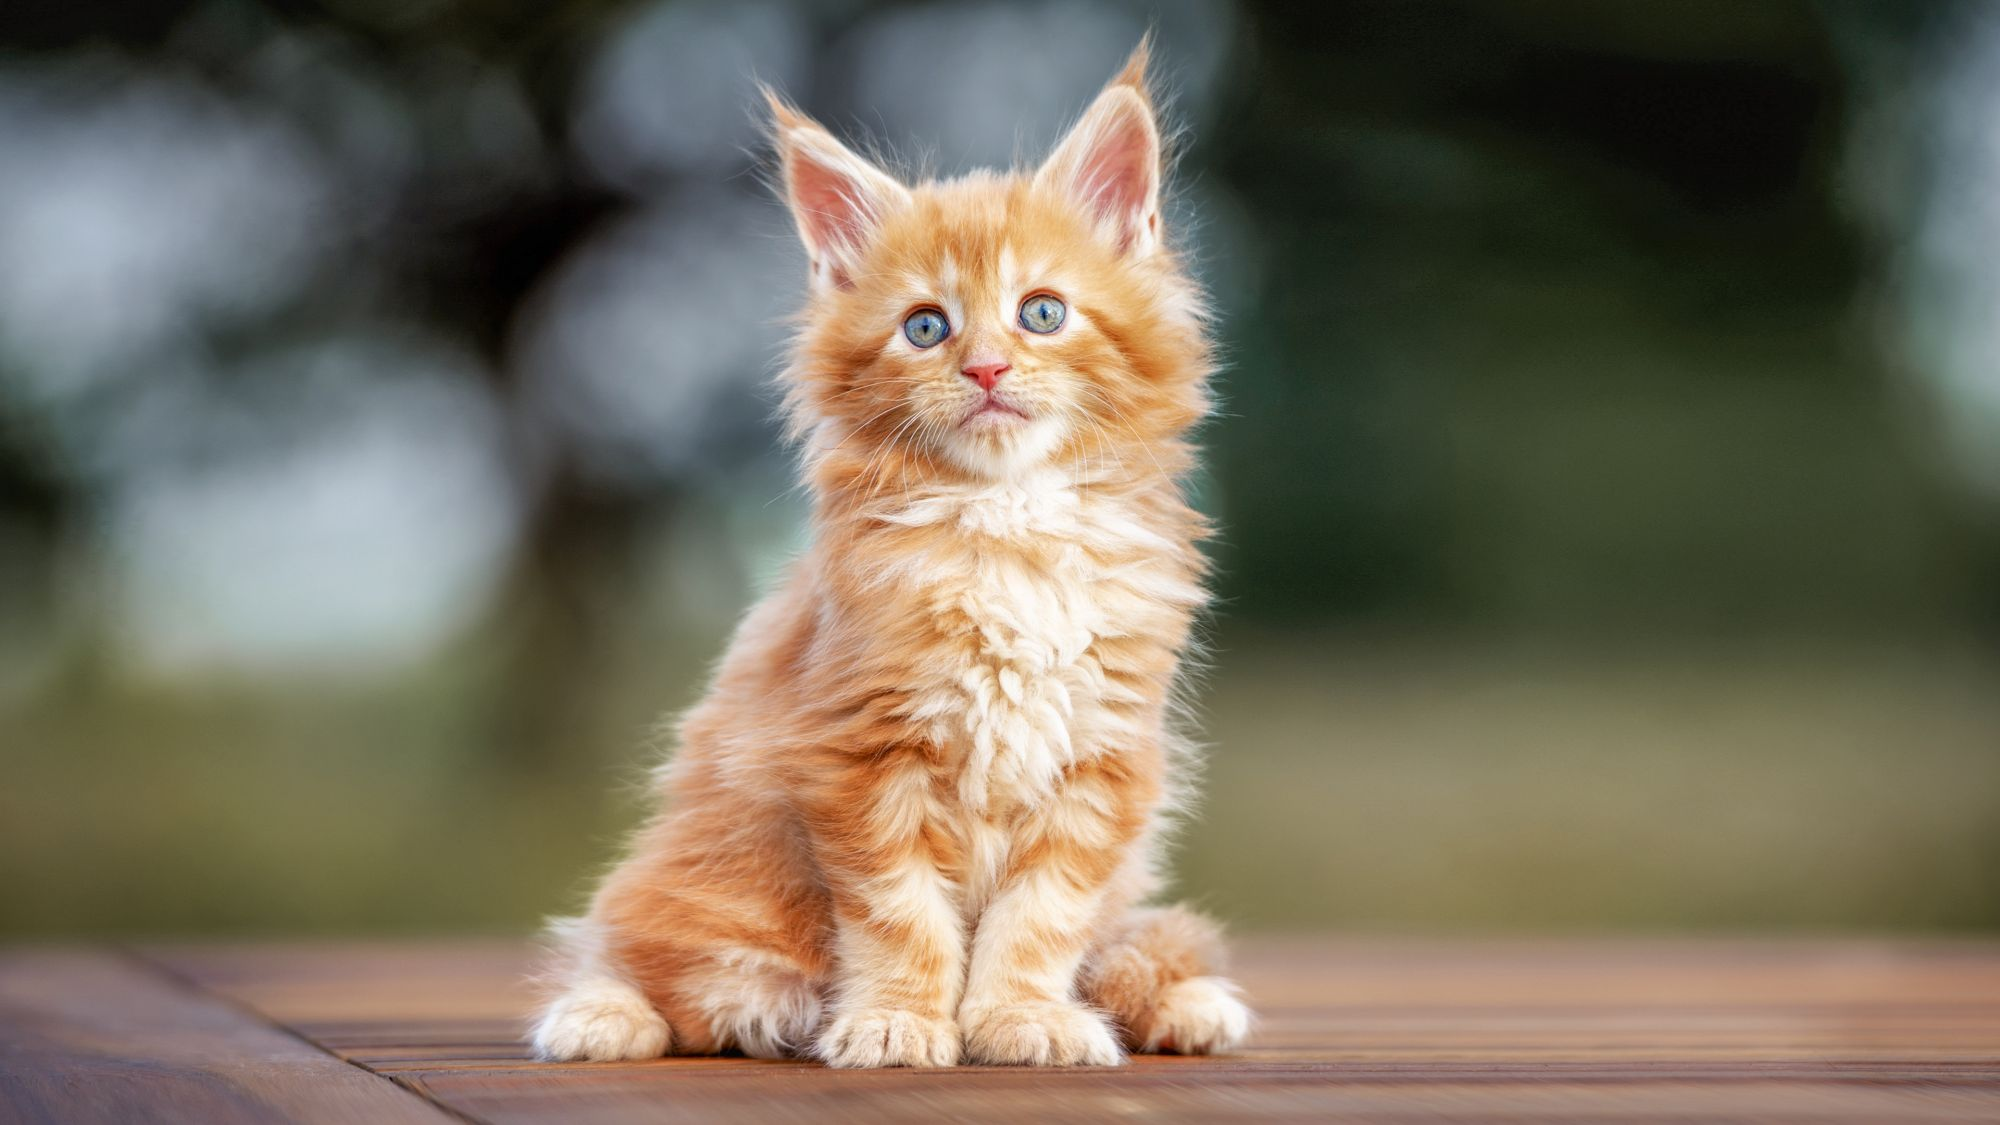 Maine Coon kitten sitting outside on a wooden table